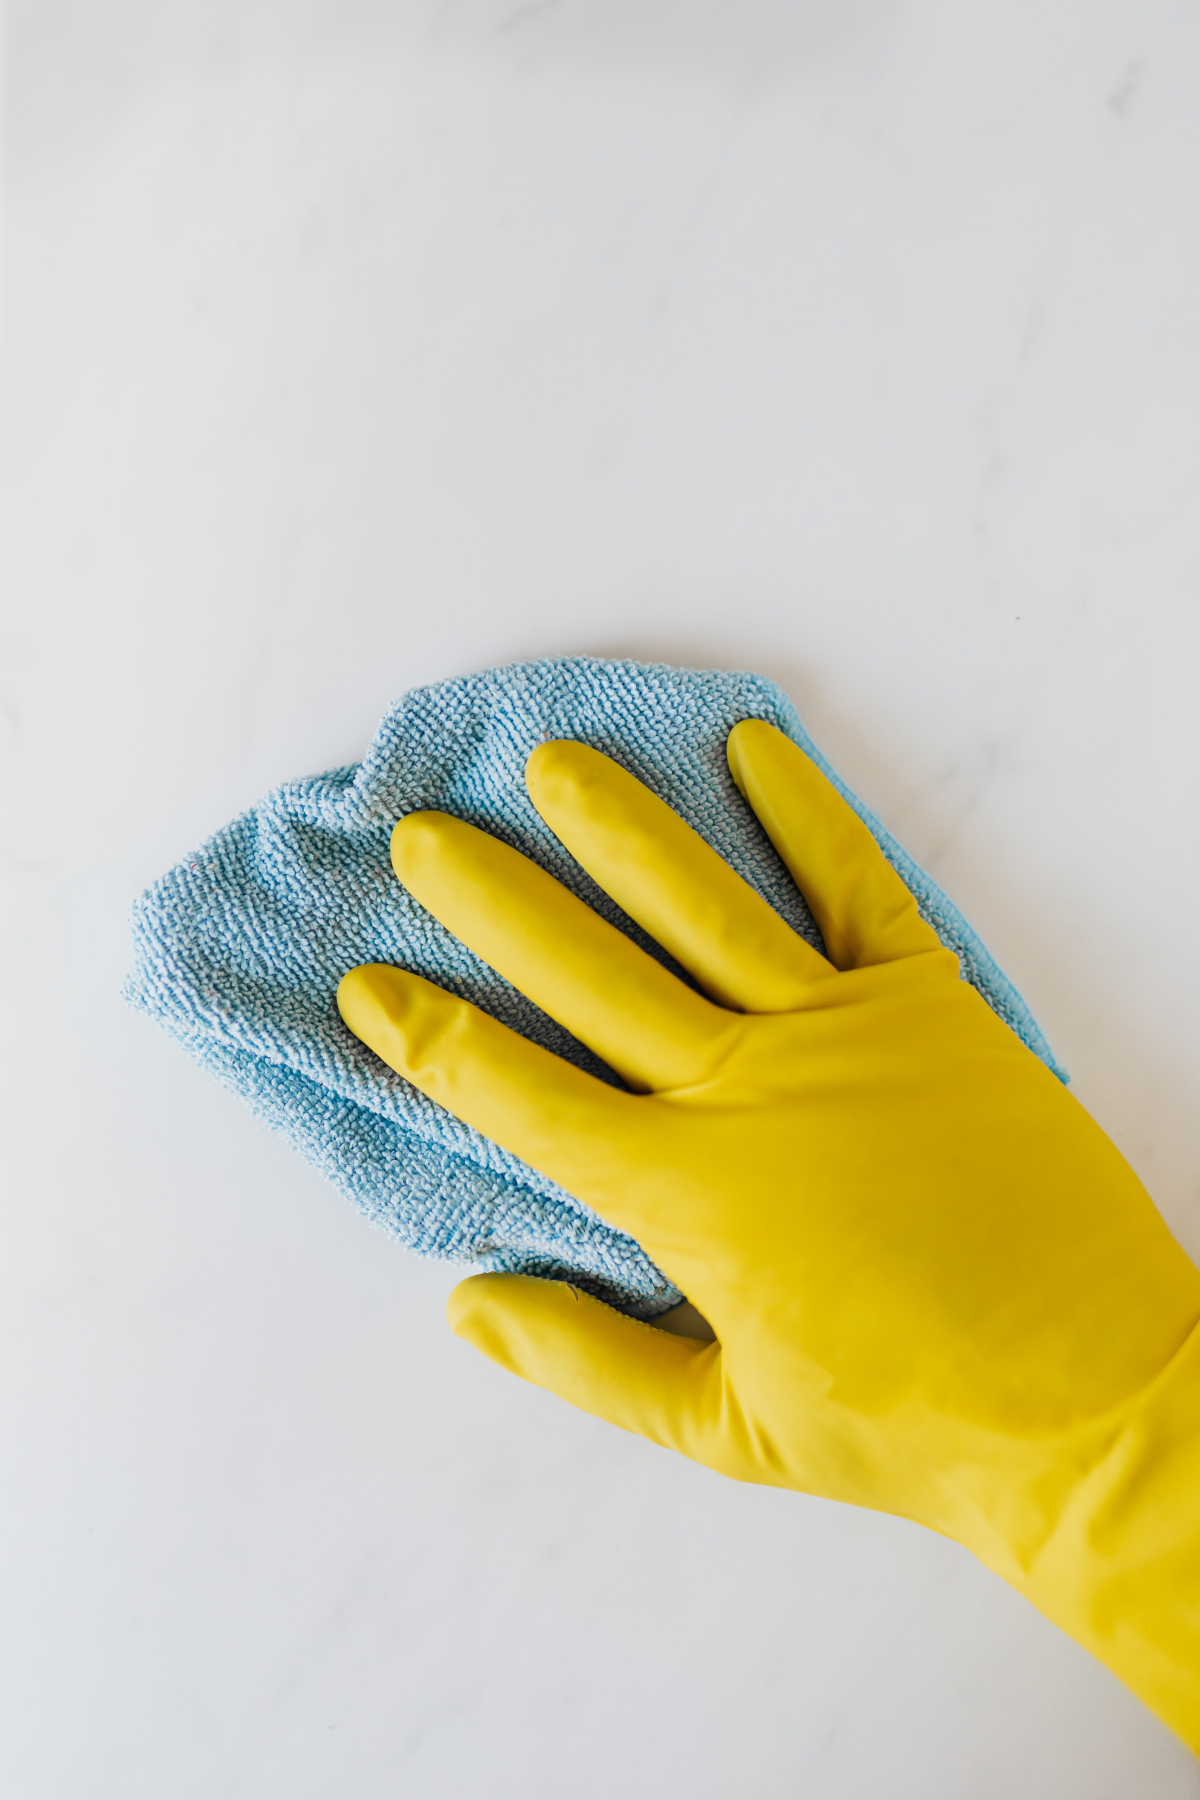 microfiber cloth and yellow gloves